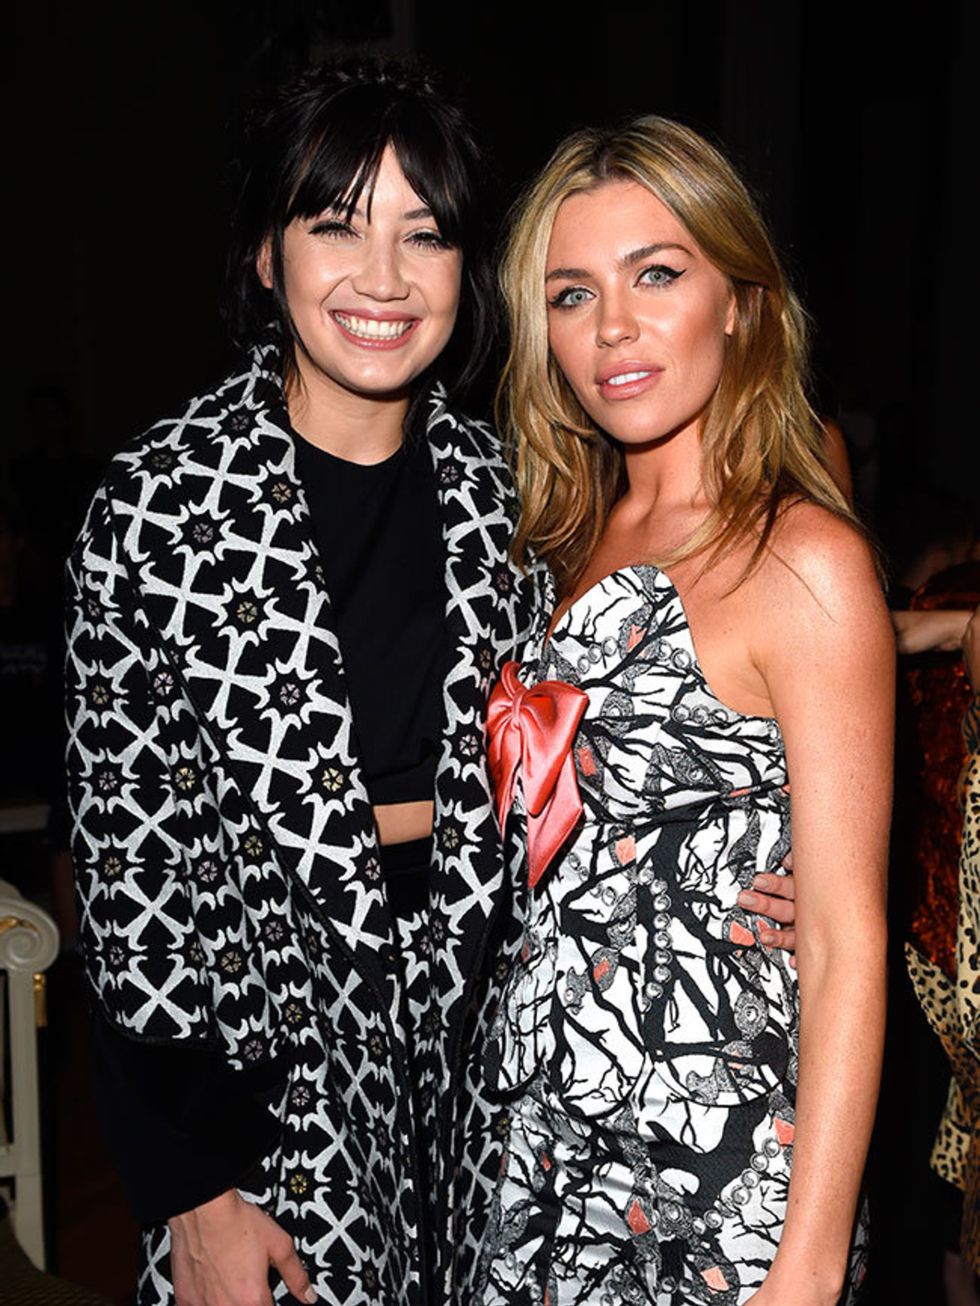 Abigail Clancy and Daisy Lowe attend the Giles s/s 16 show.